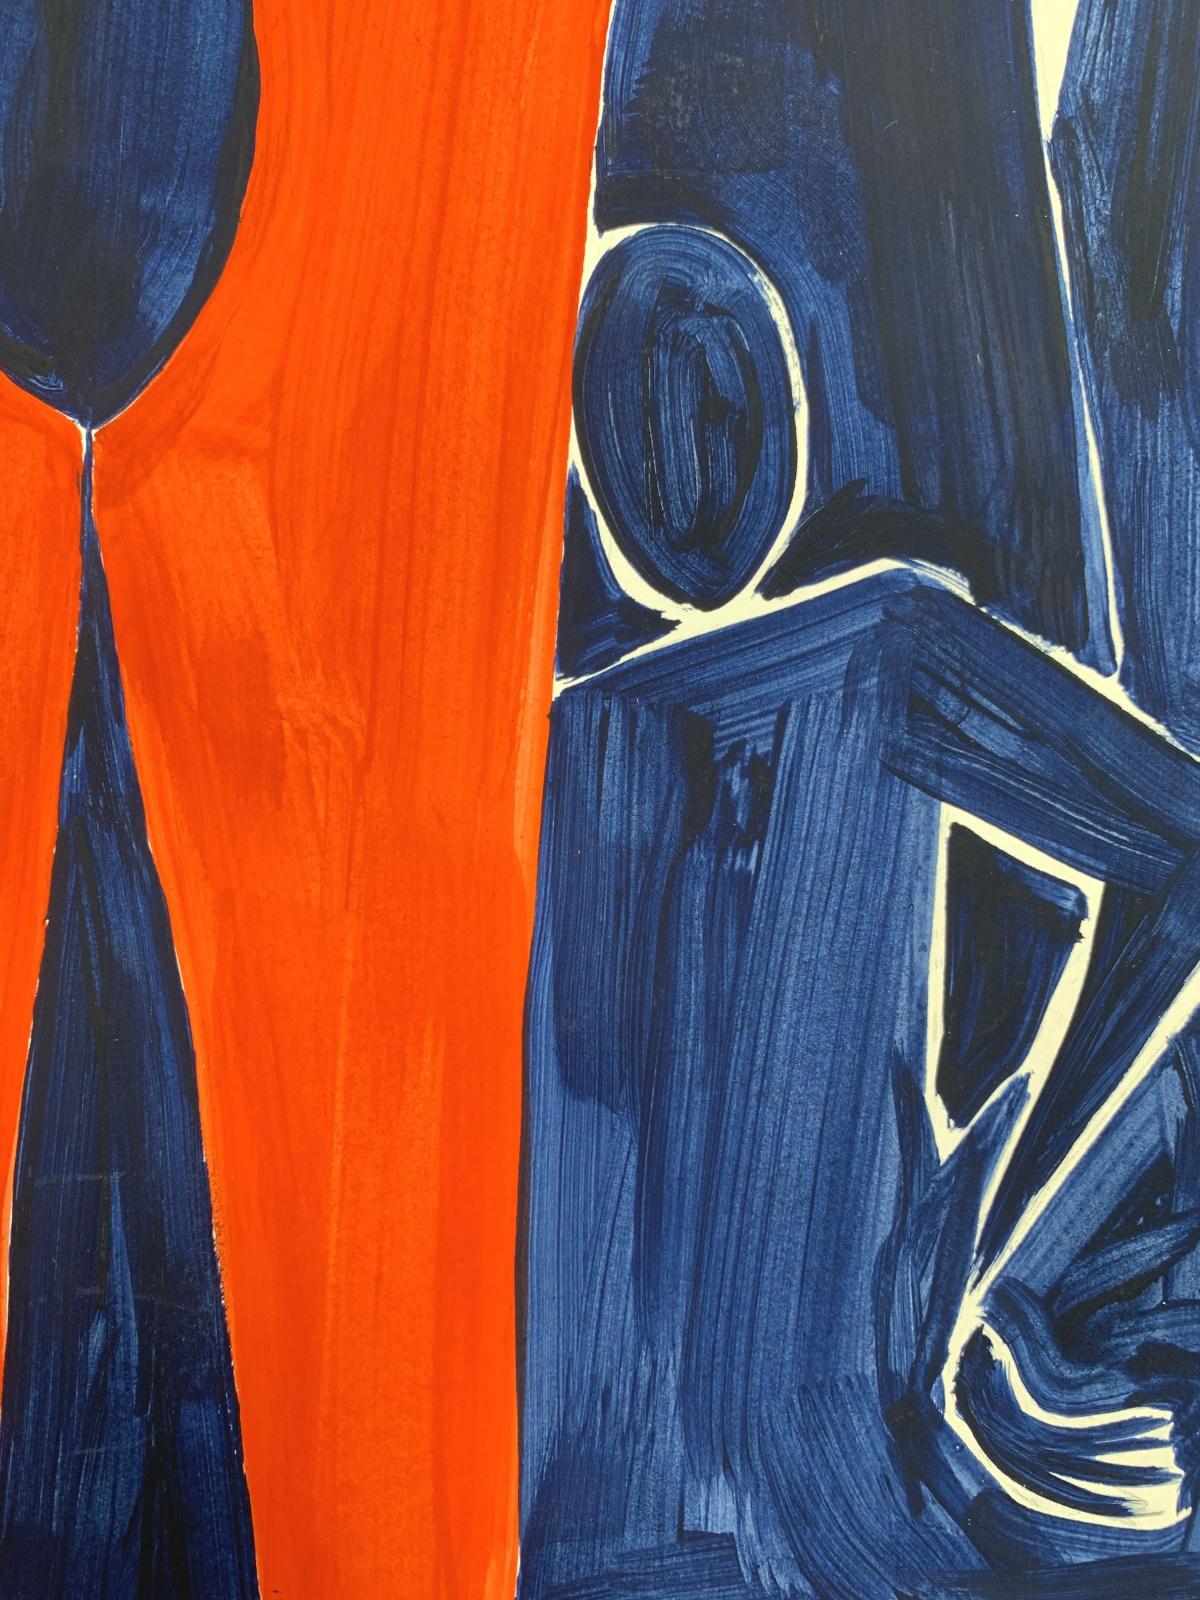 Twins. Figurative Painting on Paper, Young art, Vibrant, European art For Sale 4